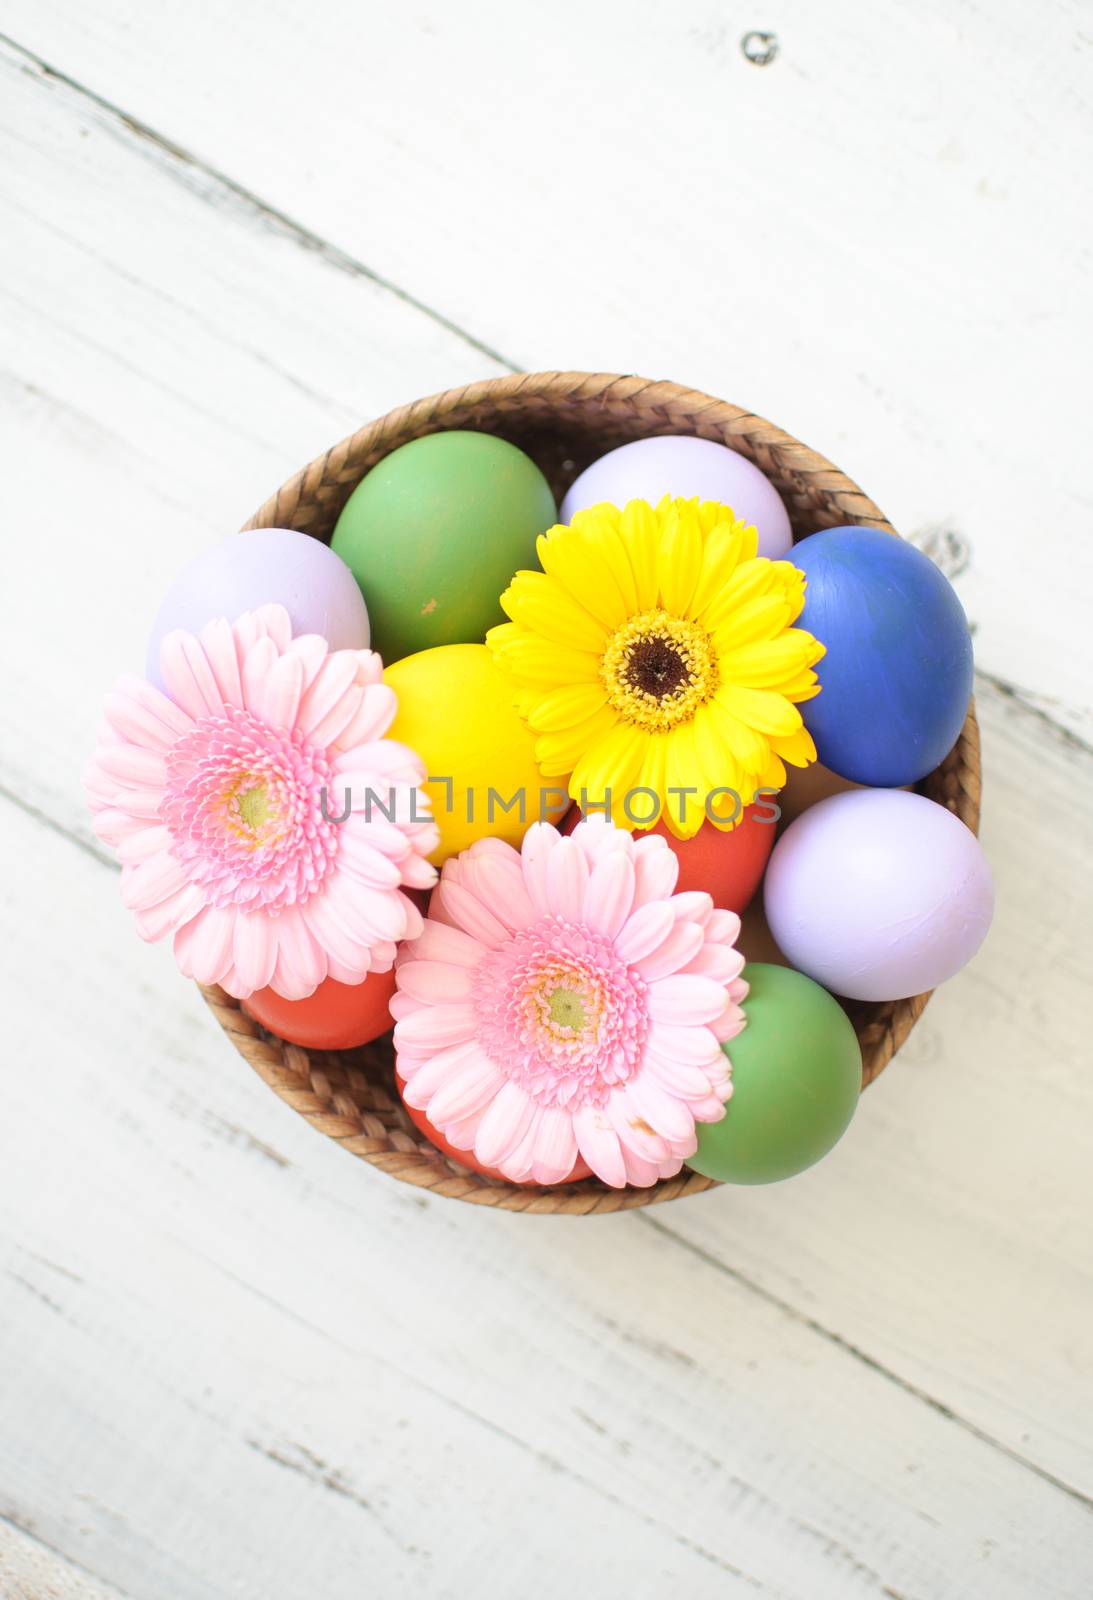 Easter eggs inside a wicker basket with daisies